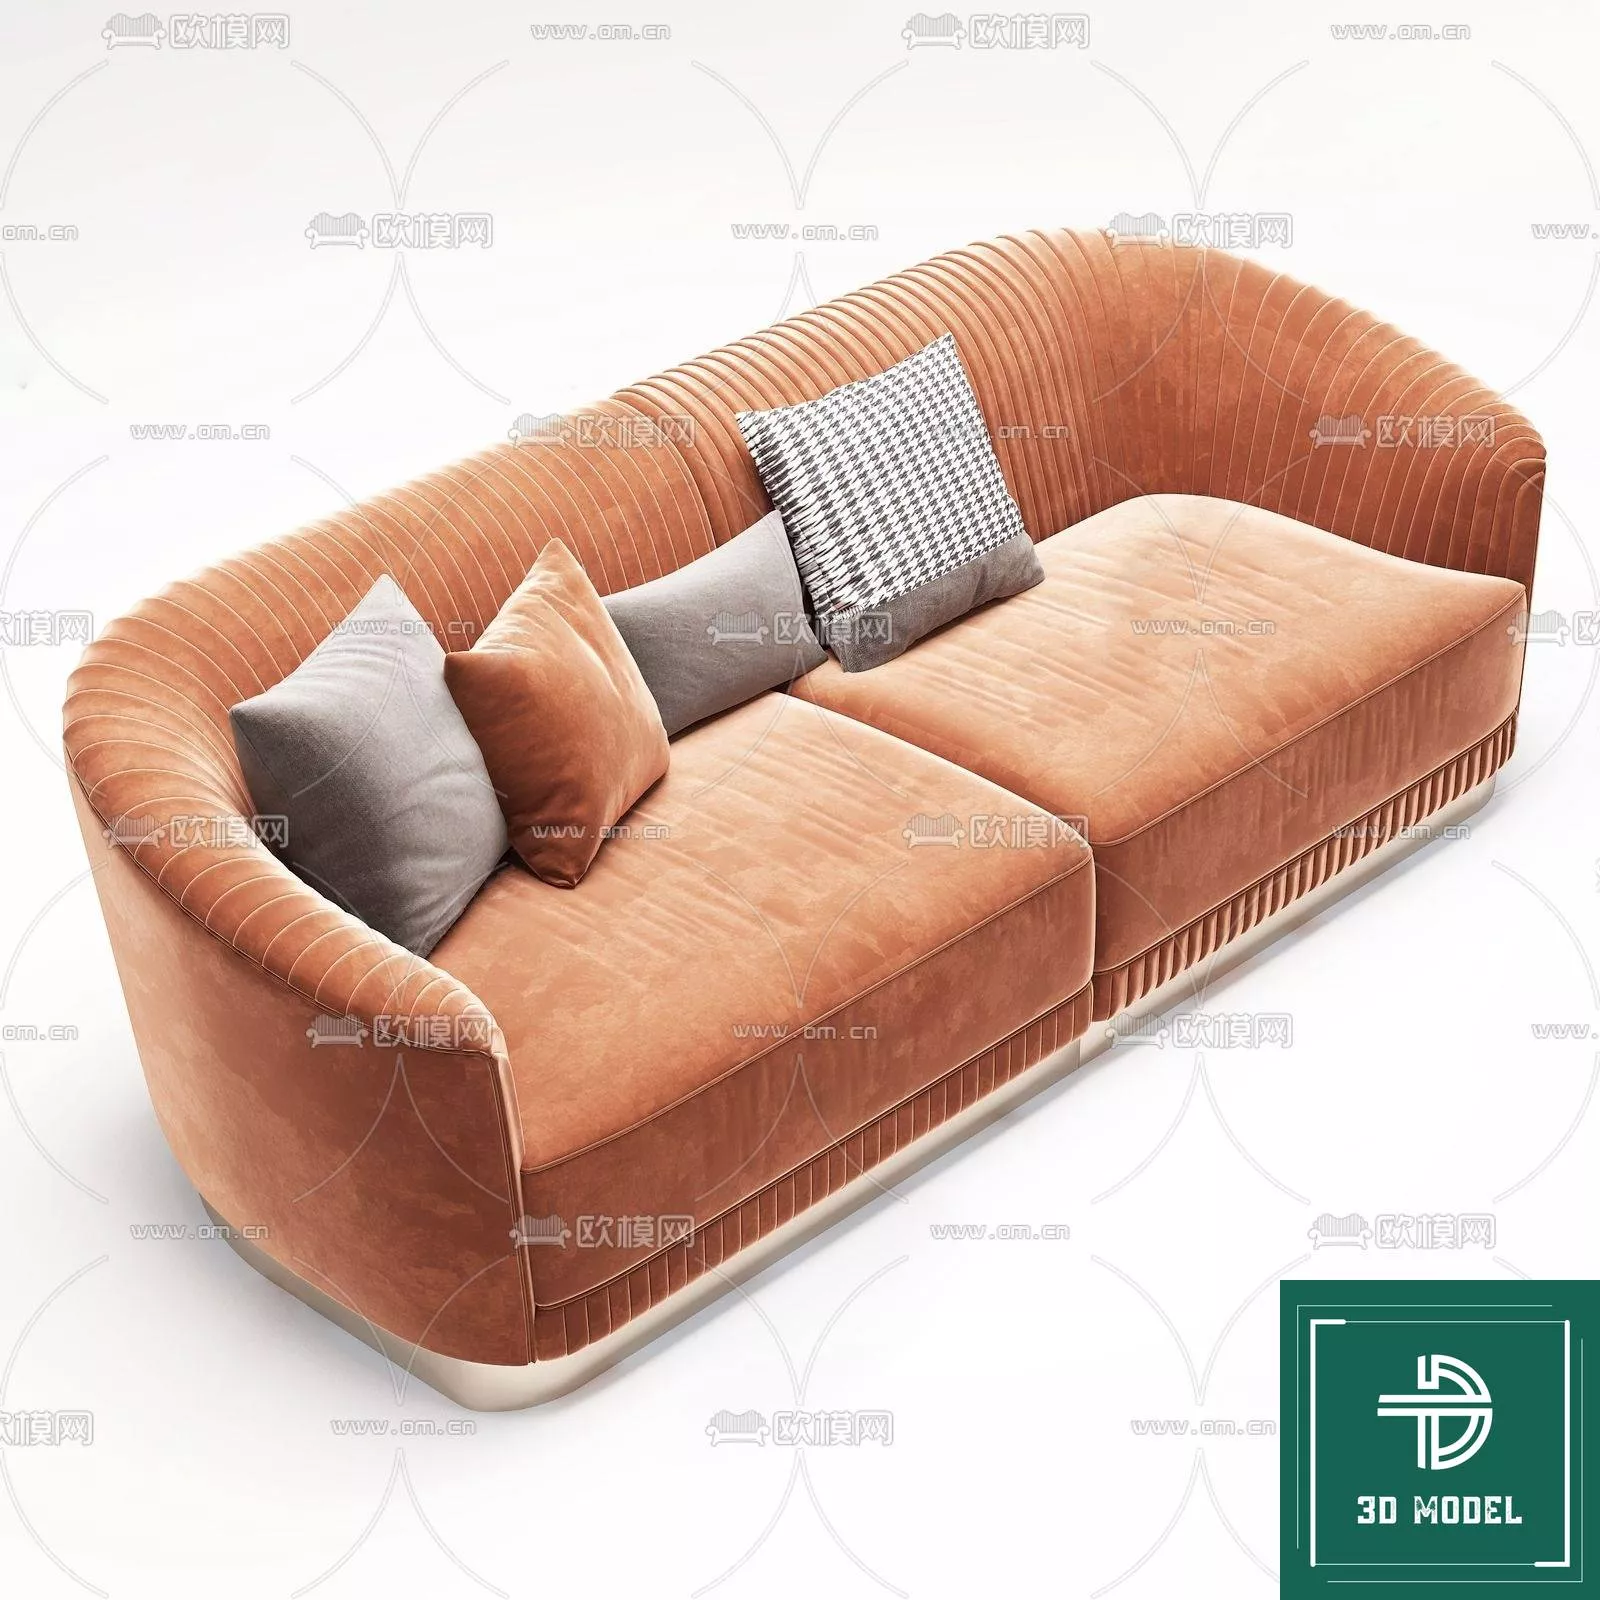 MODERN SOFA - SKETCHUP 3D MODEL - VRAY OR ENSCAPE - ID13224